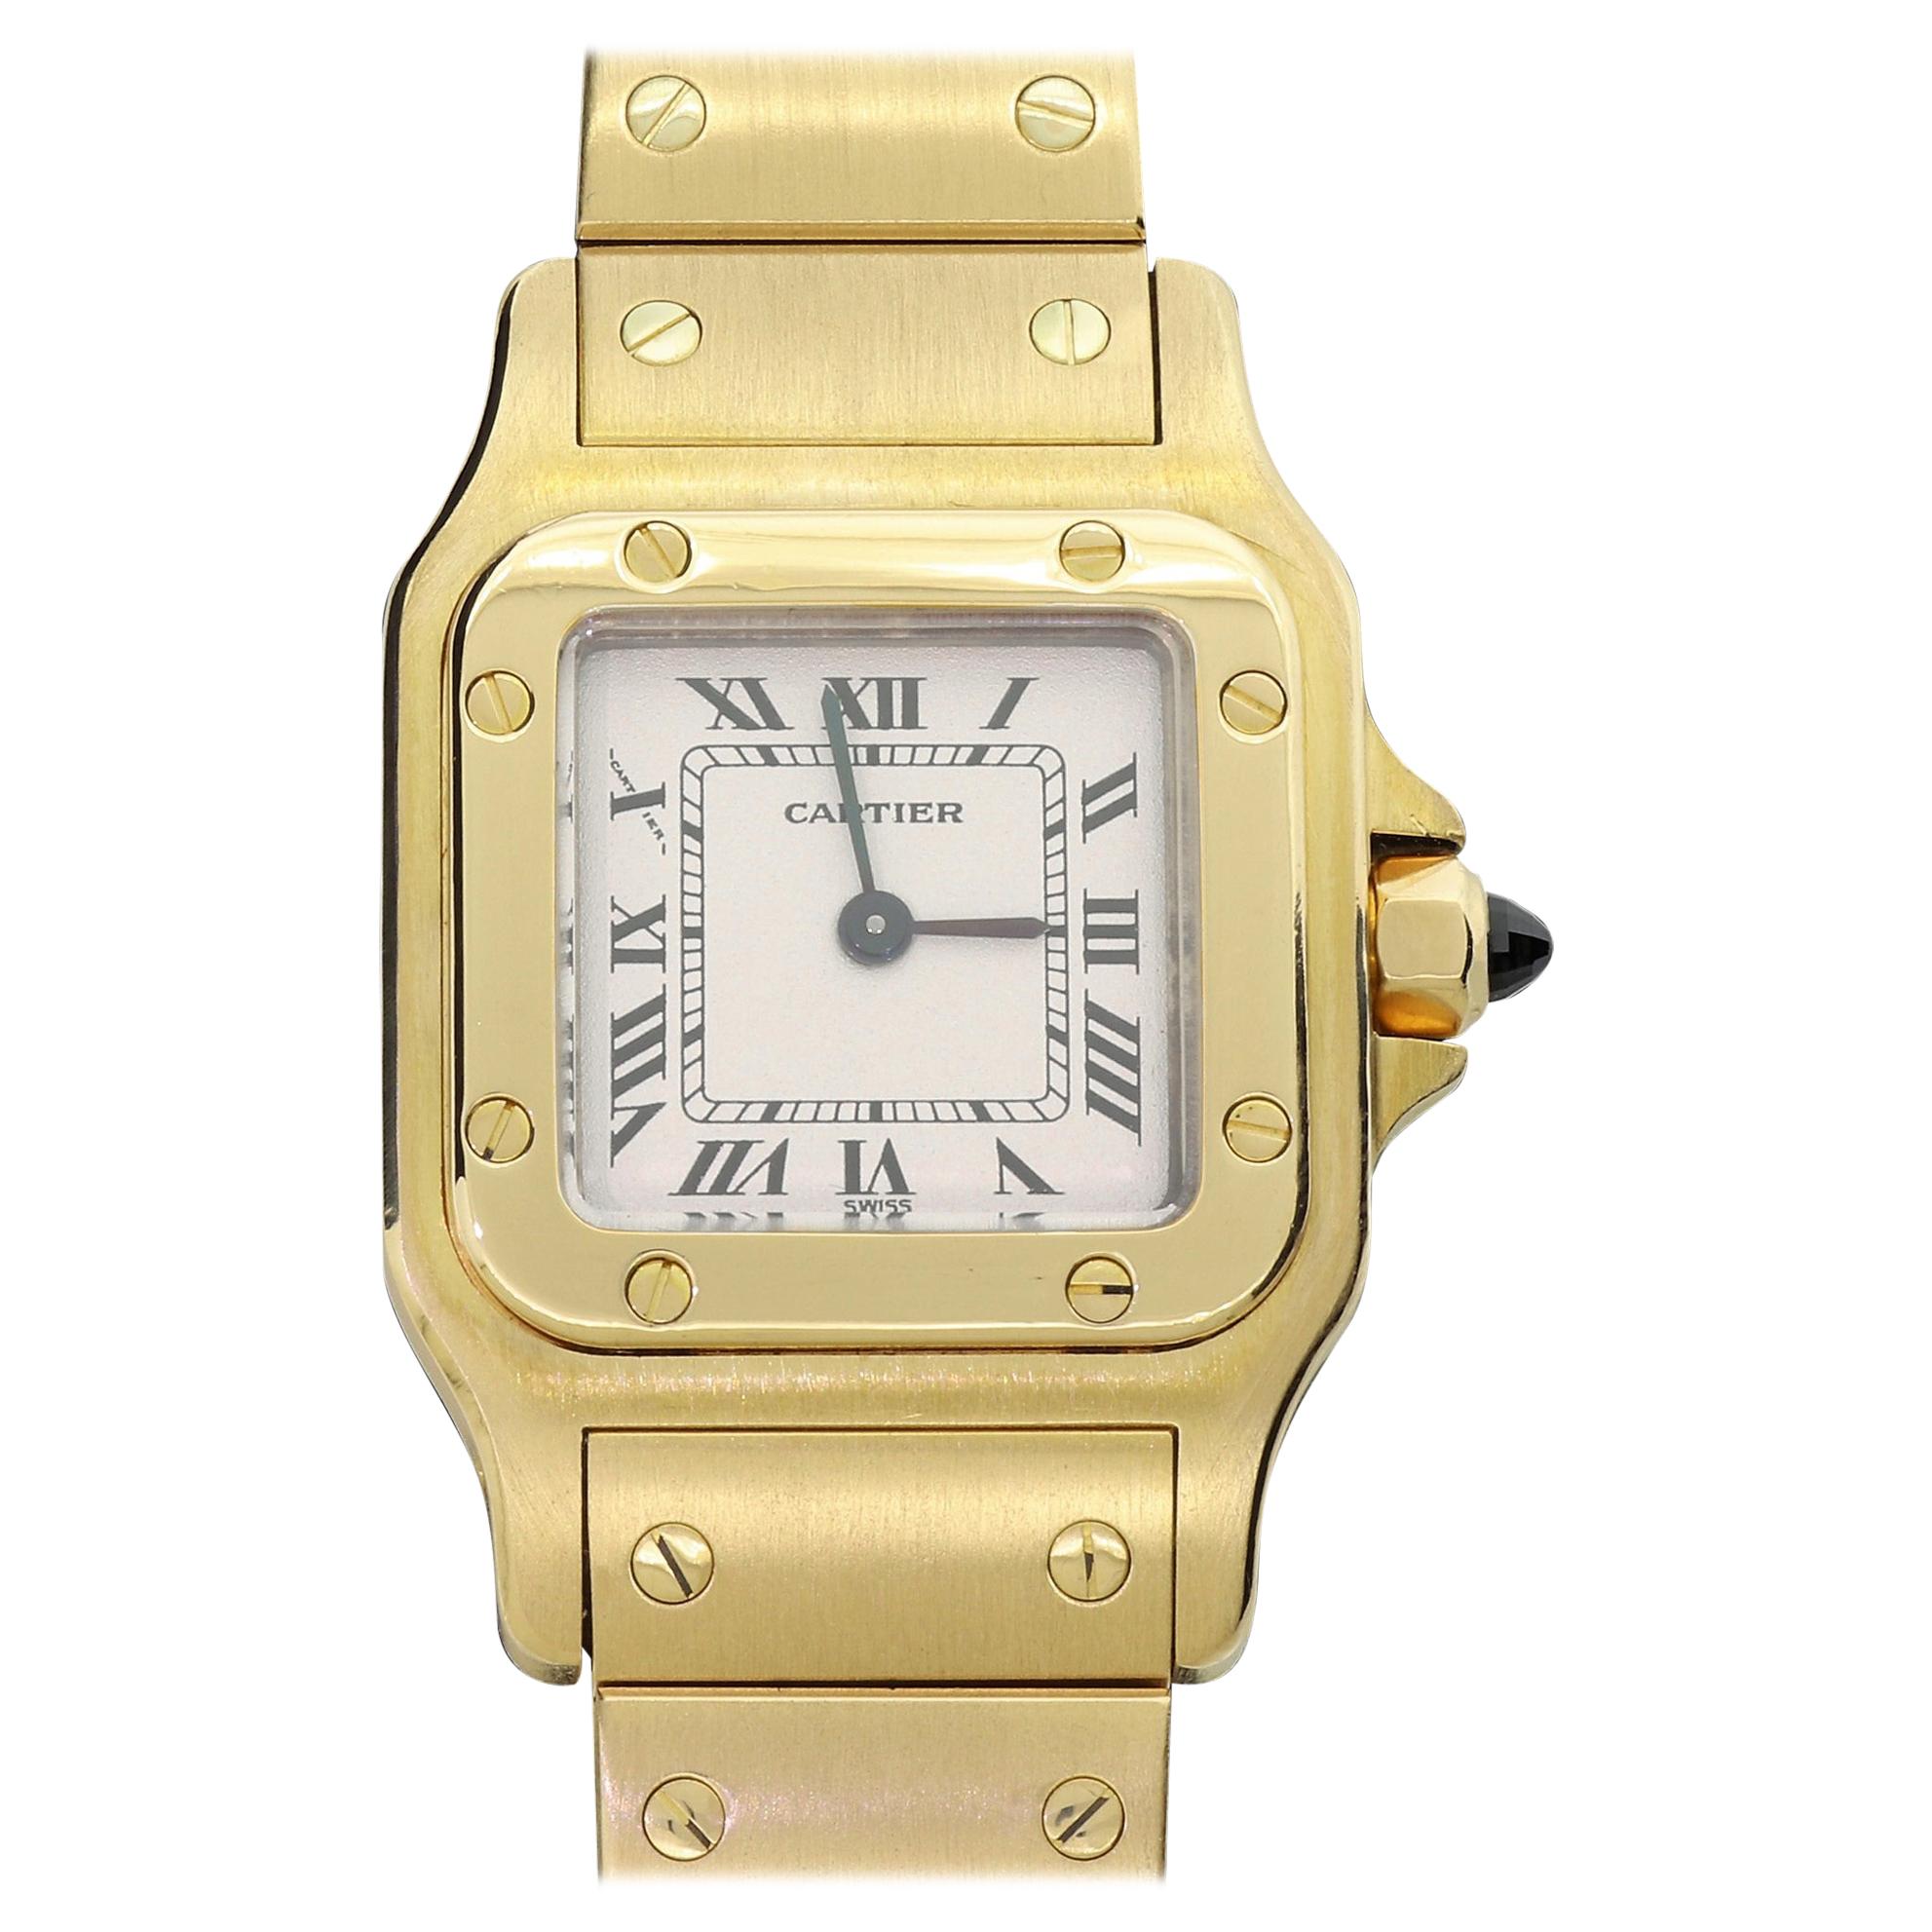 Ladies Cartier Santos 18K 750 Solid Gold Watch W Papers and Box 1569 One Owner